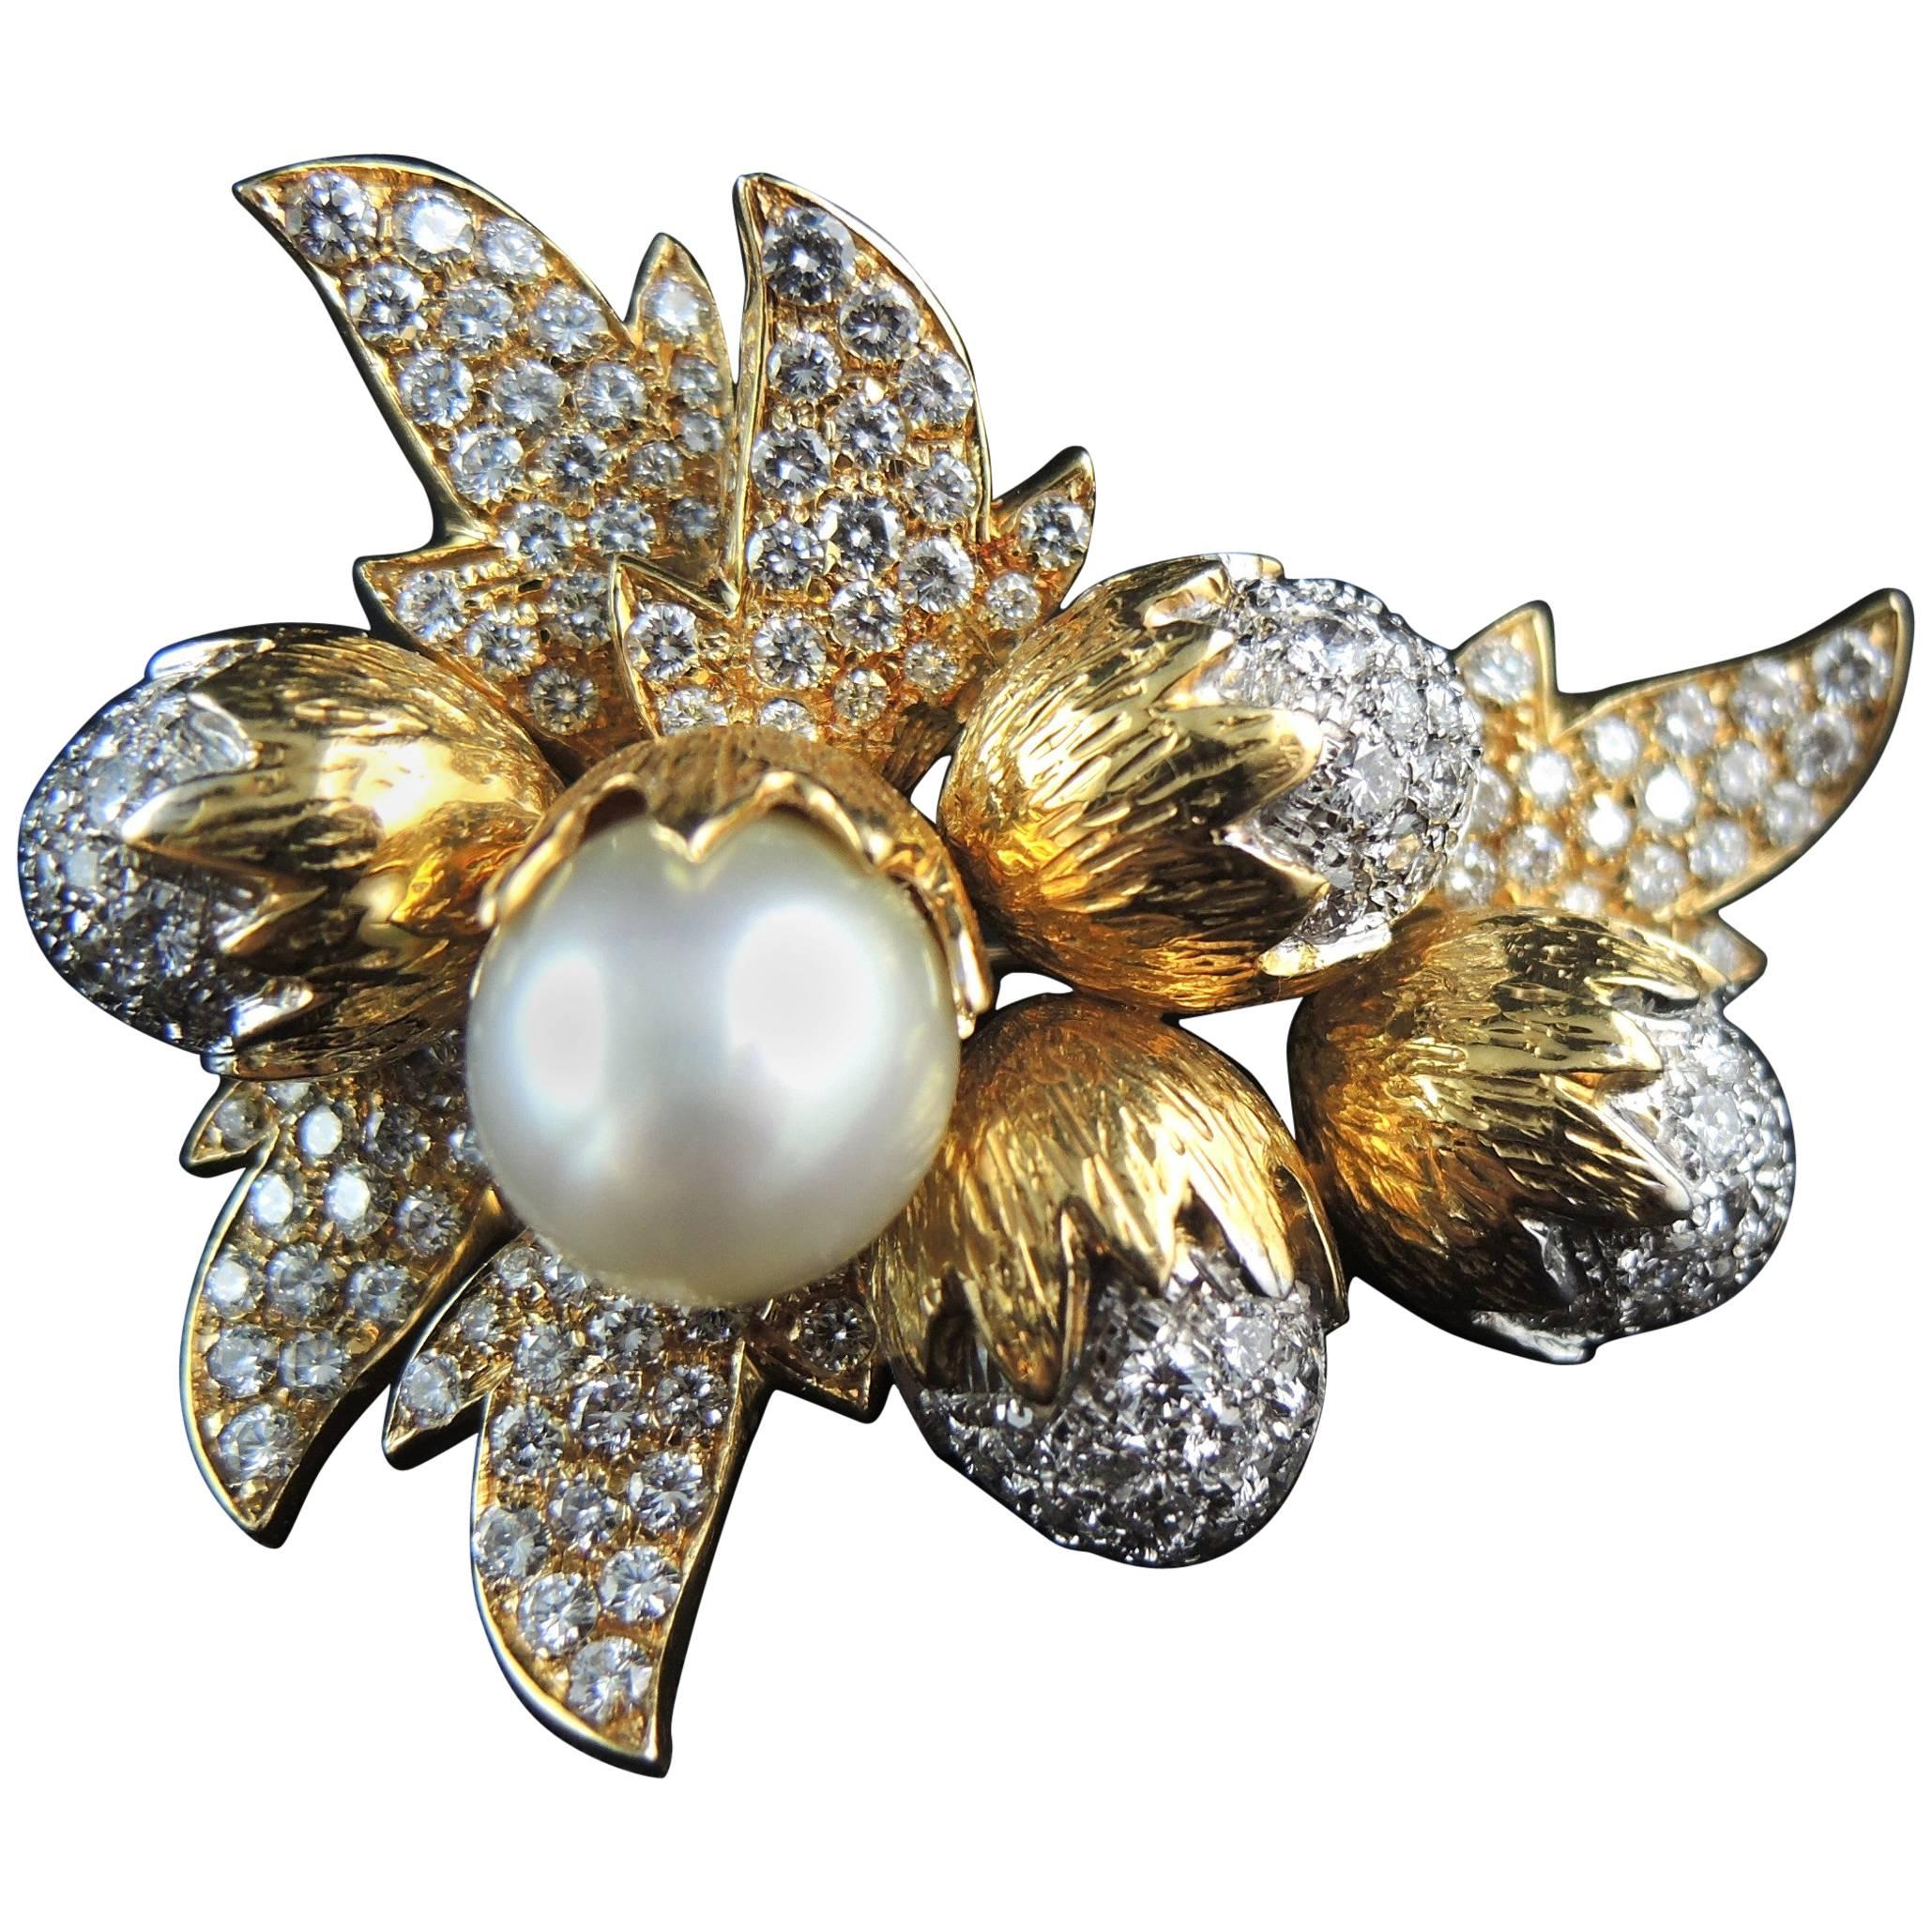 Hazelnuts' Acorns and Leaves Brooch Set with Diamonds and South Sea Pearl, 1980s